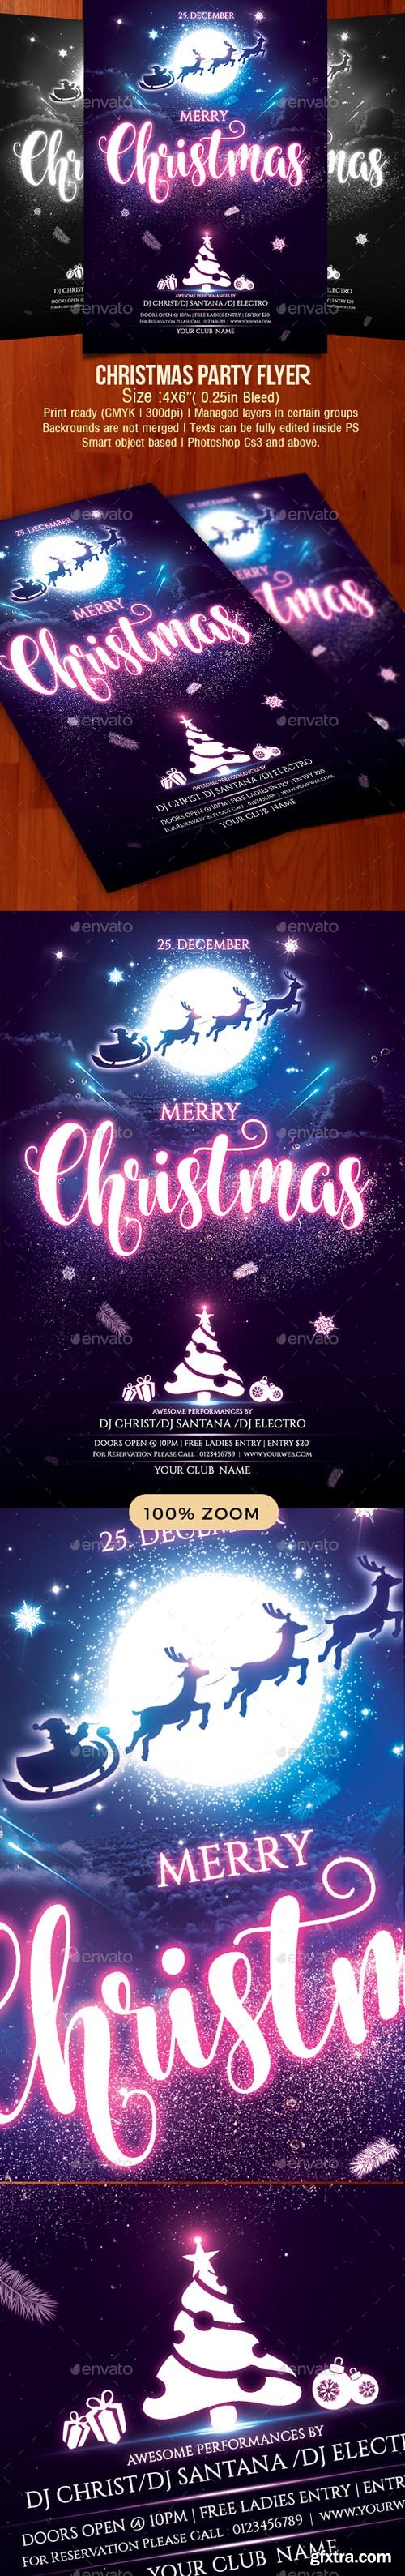 GR - Christmas Party Flyer 21023856